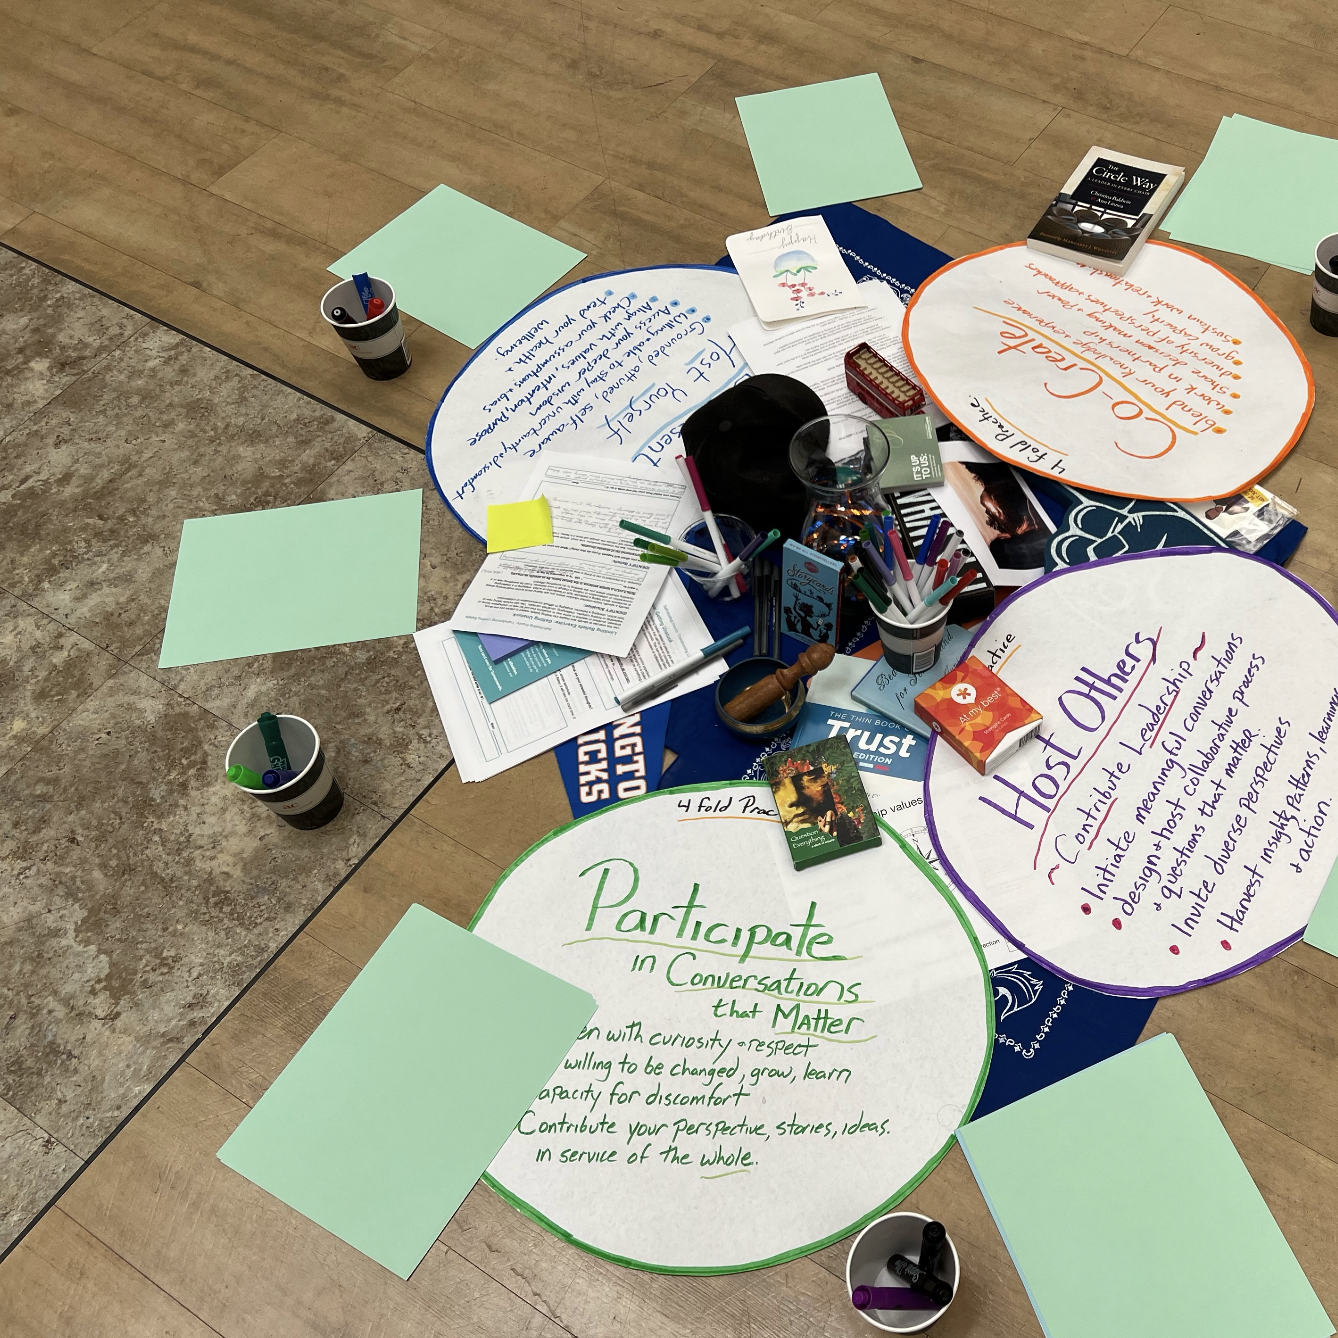 participative leadership activity materials on wooden floor green paper and written notes on circular paper